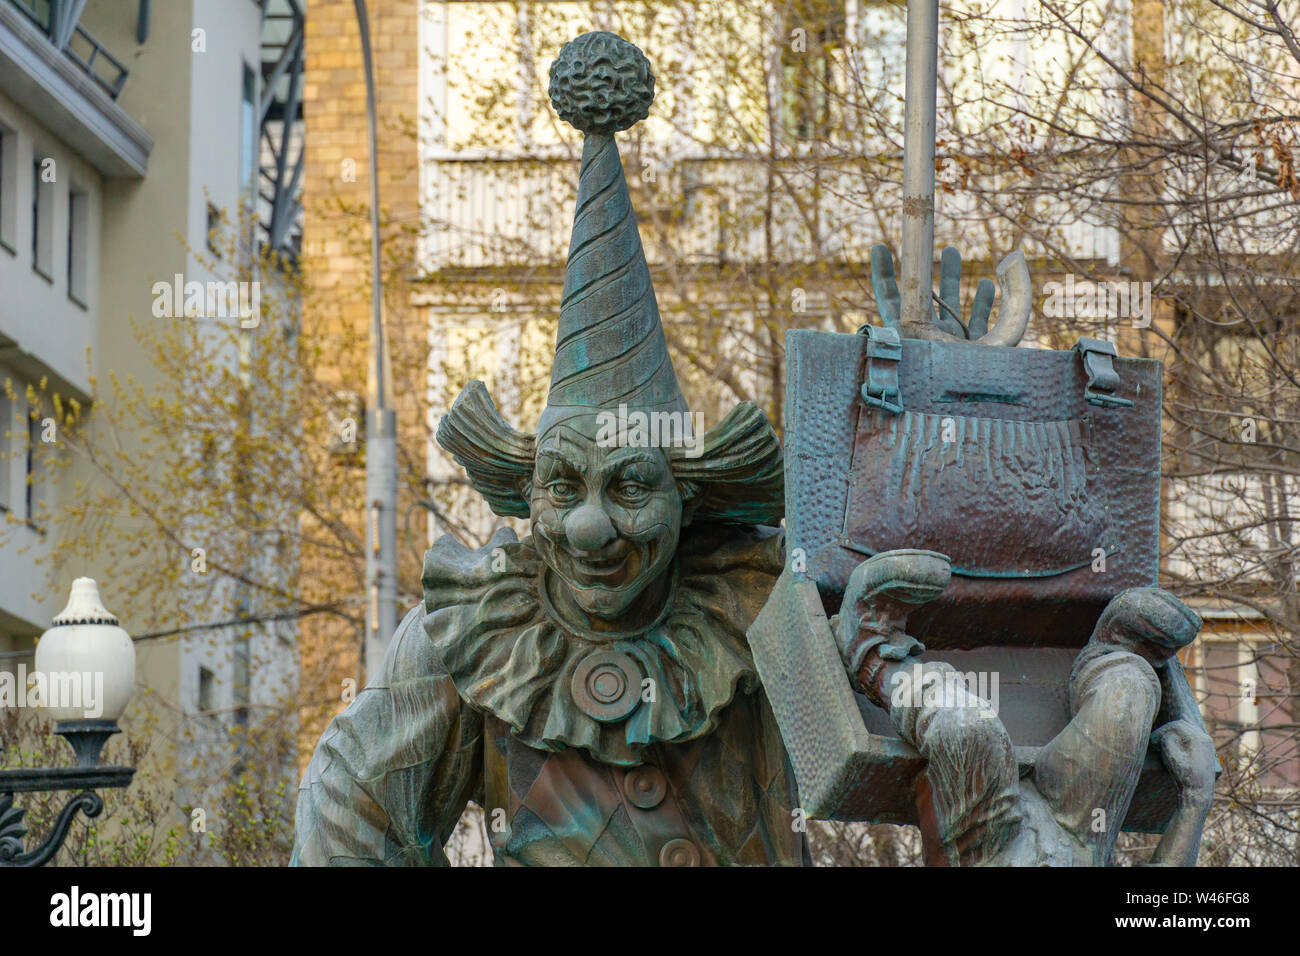 Moscow, Russia - April 29, 2019: A bronze statue of clown at Clowns Square on Tsvetnoy Boulevard in Moscow Stock Photo